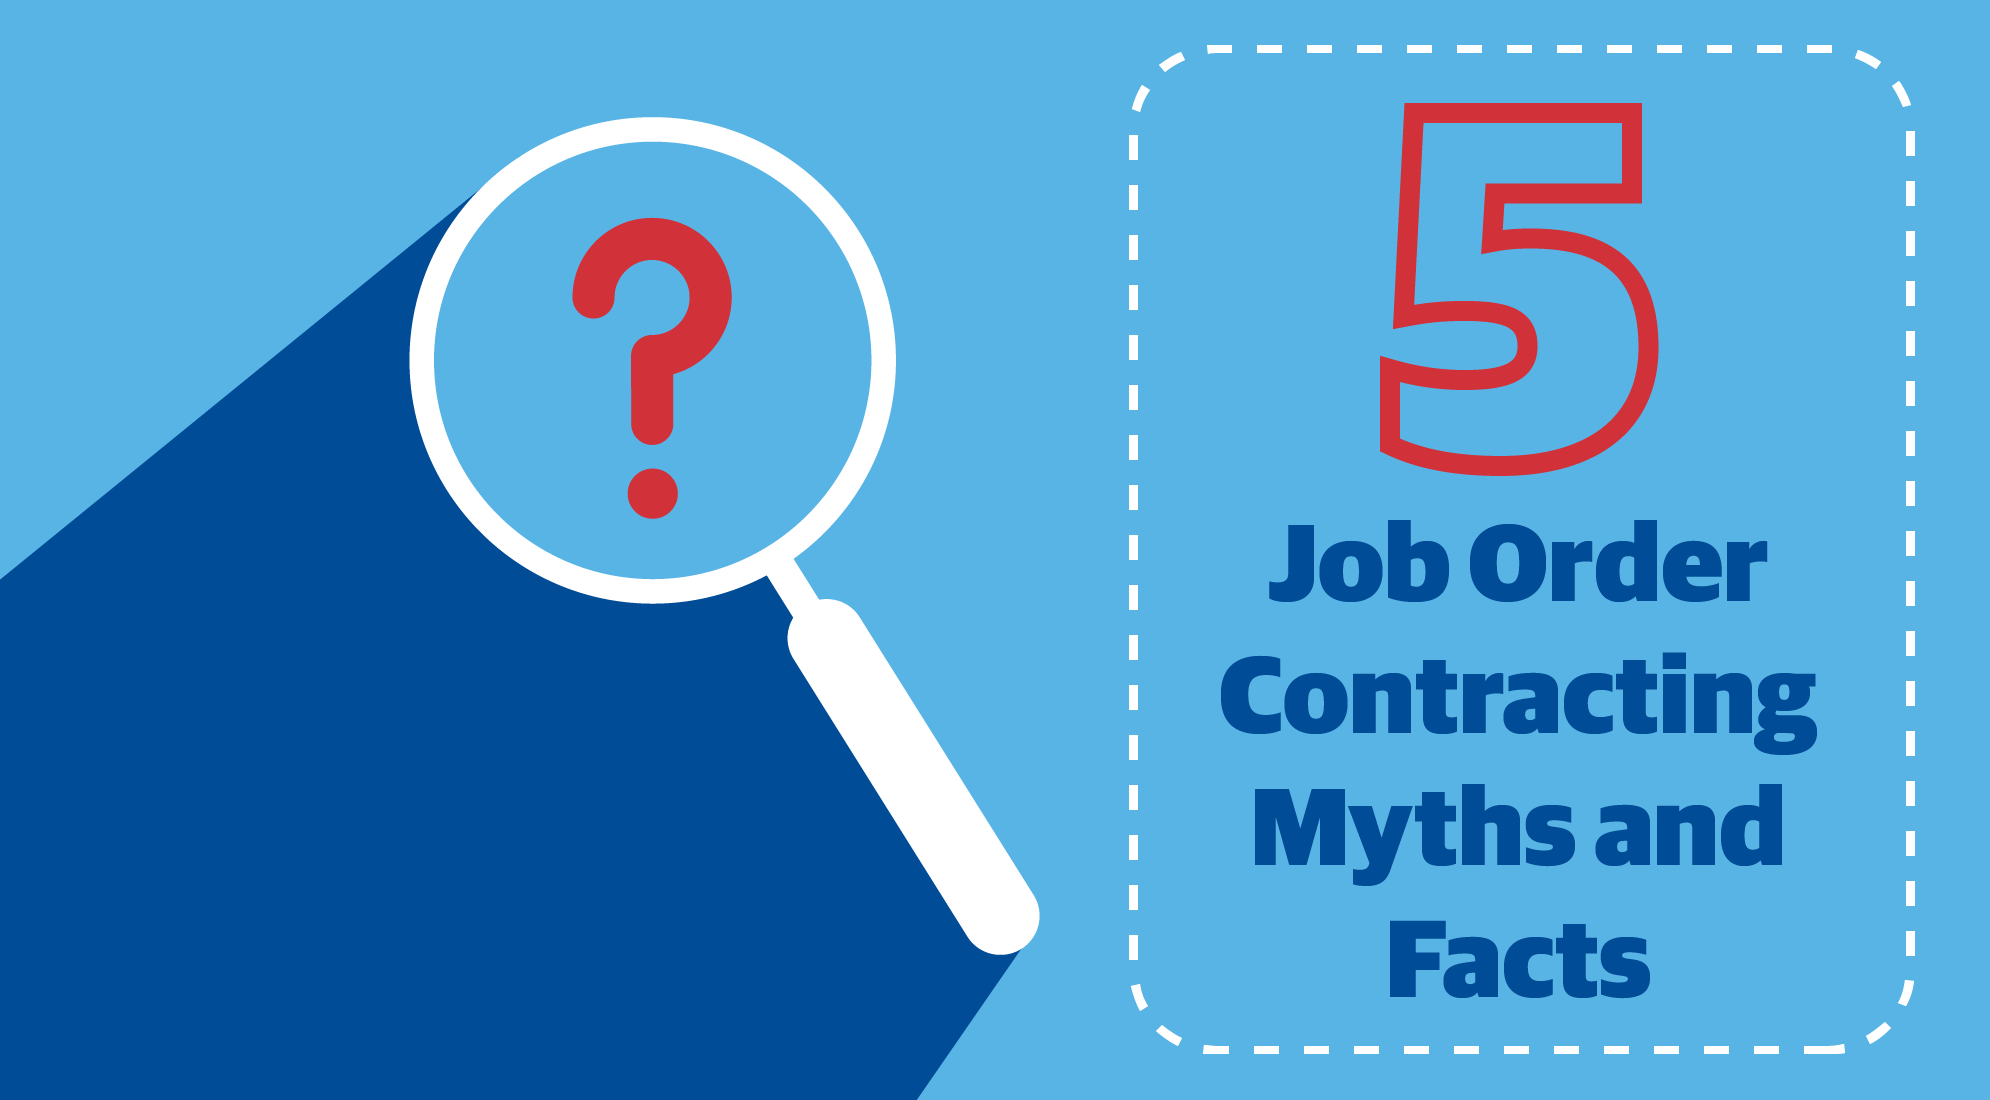 5 job order contracting facts and myths